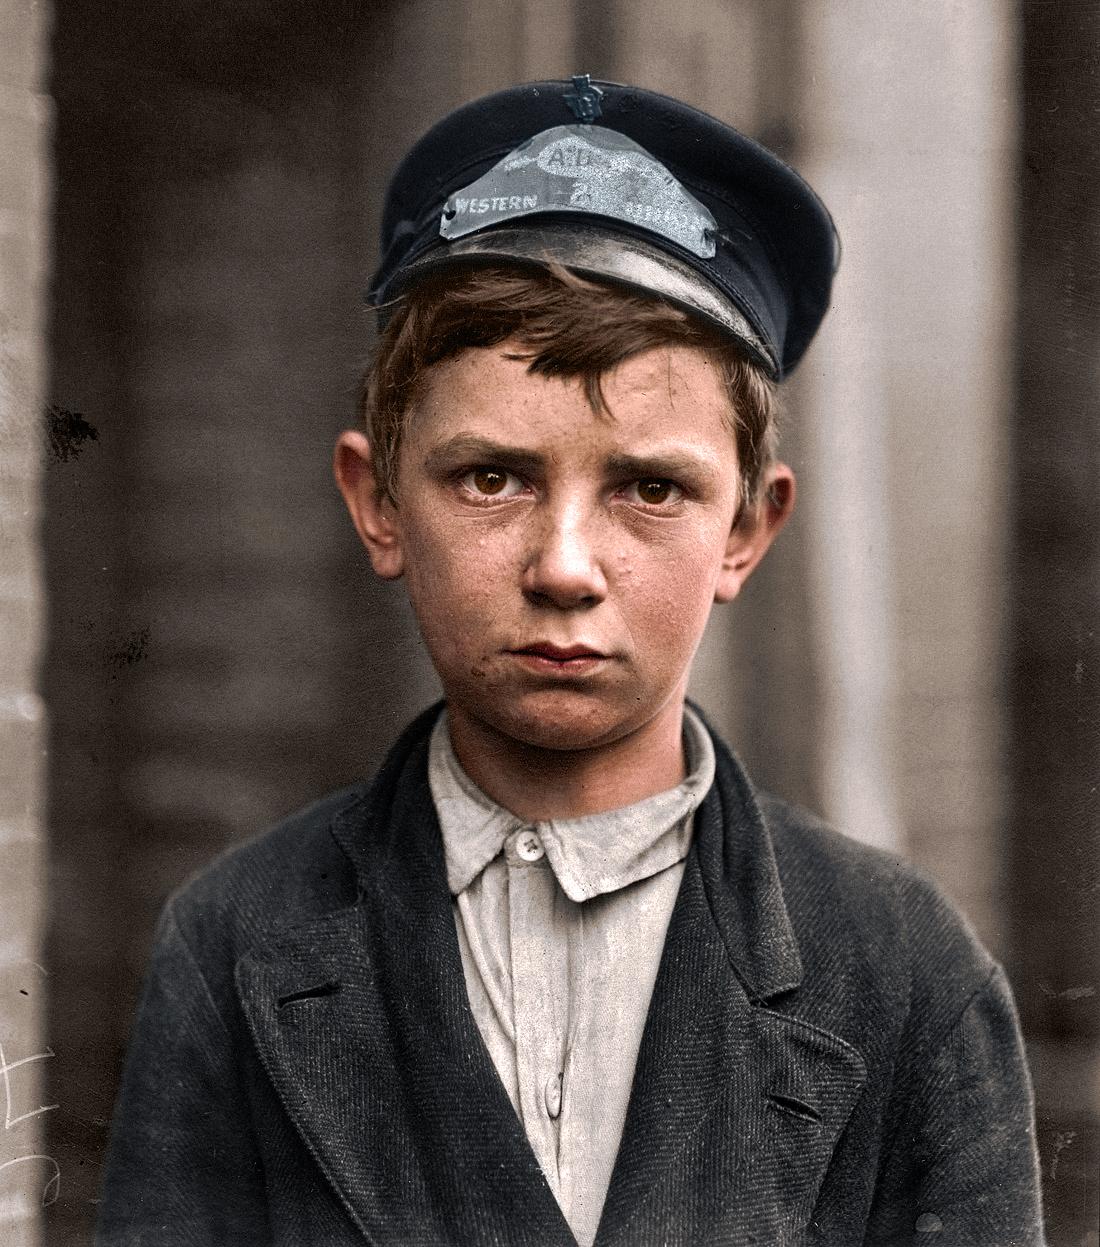 Richard Pierce – 14 years of age, works as a Western Union Telegraph Messenger. with nine months of service. He works from 7 a.m. to 6 p.m. Smokes. Visits houses of prostitution. Wilmington, Delaware, ca. May 1910